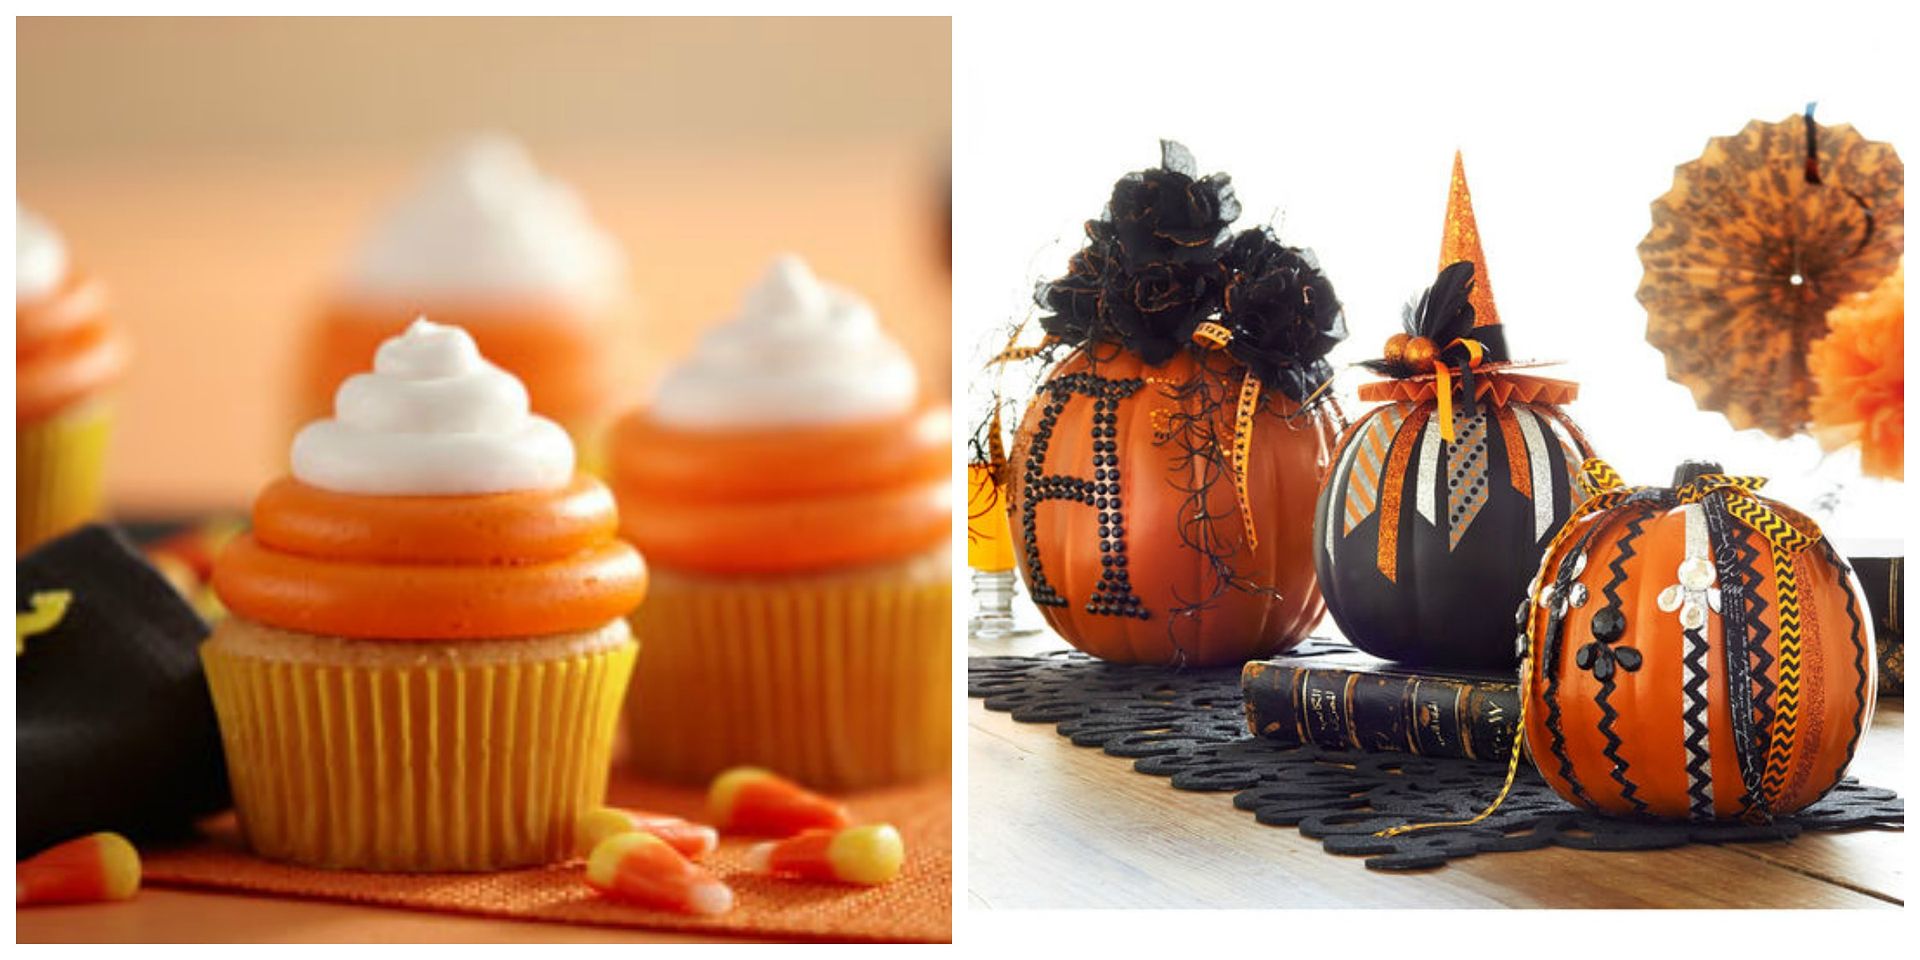 Best Halloween events for kids: Check out Craft classes at Michael's!